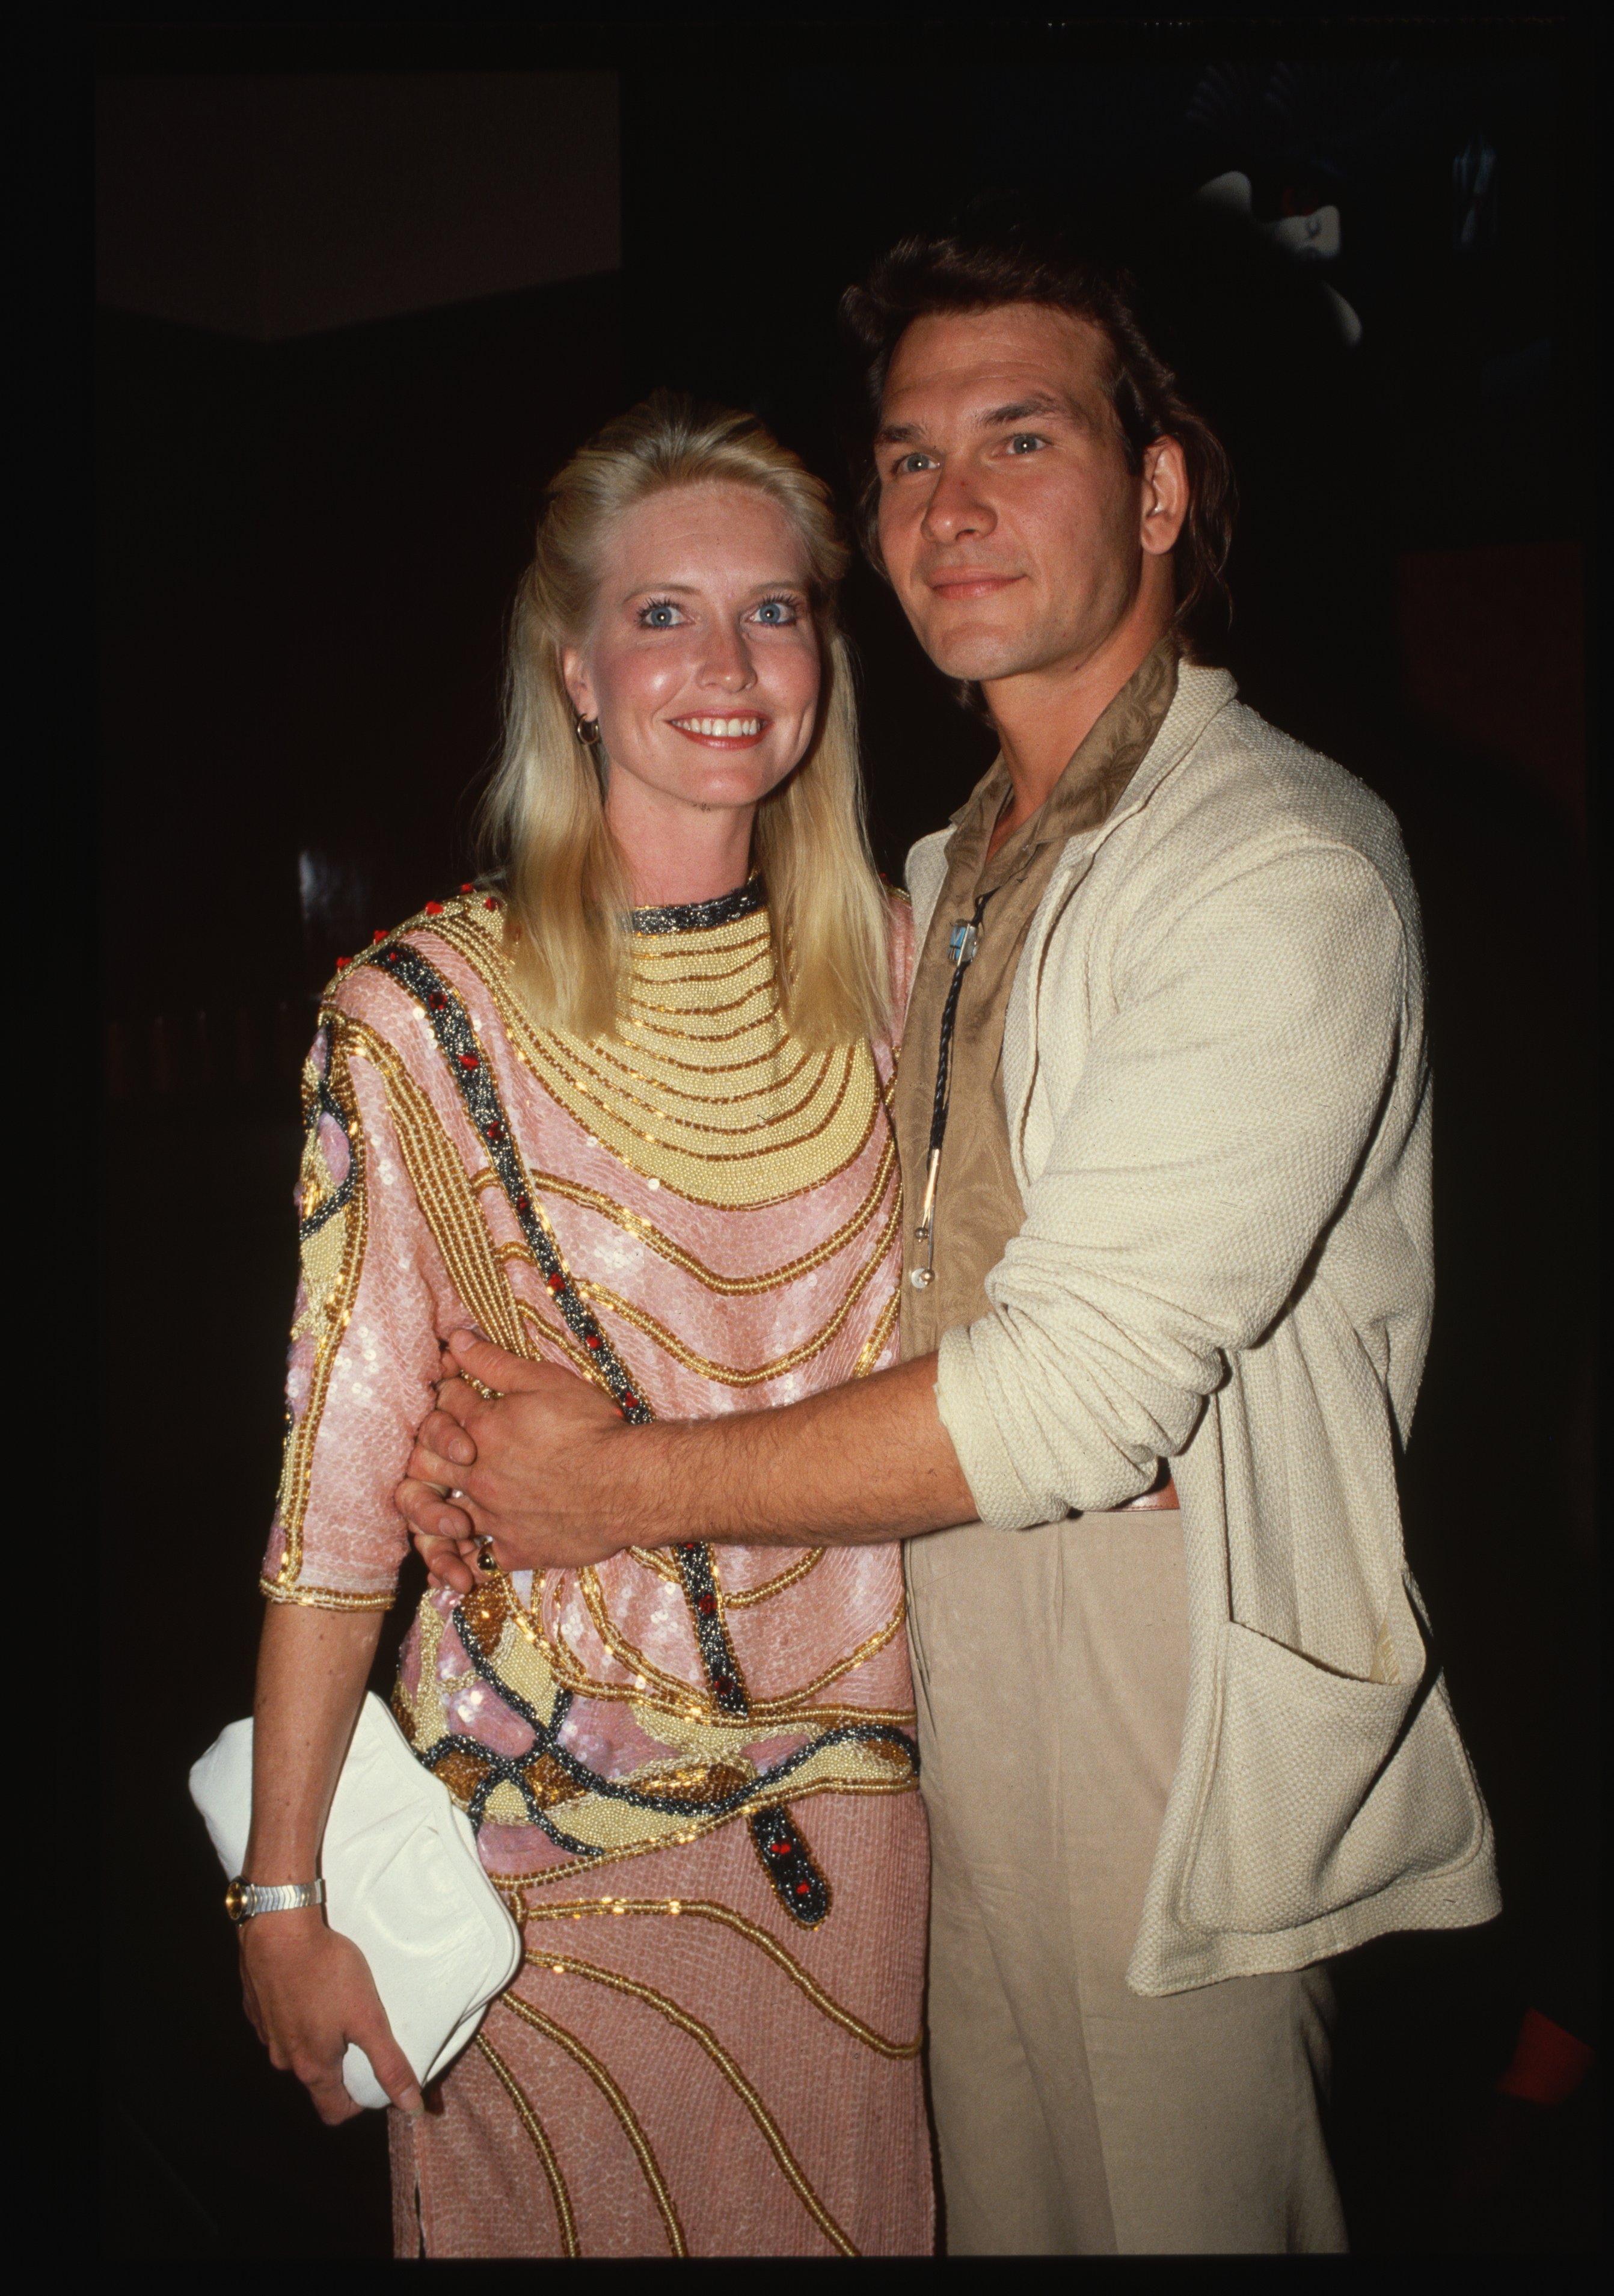 Patrick Swayze embraces his wife Lisa Niemi, 1987 | Photo: GettyImages